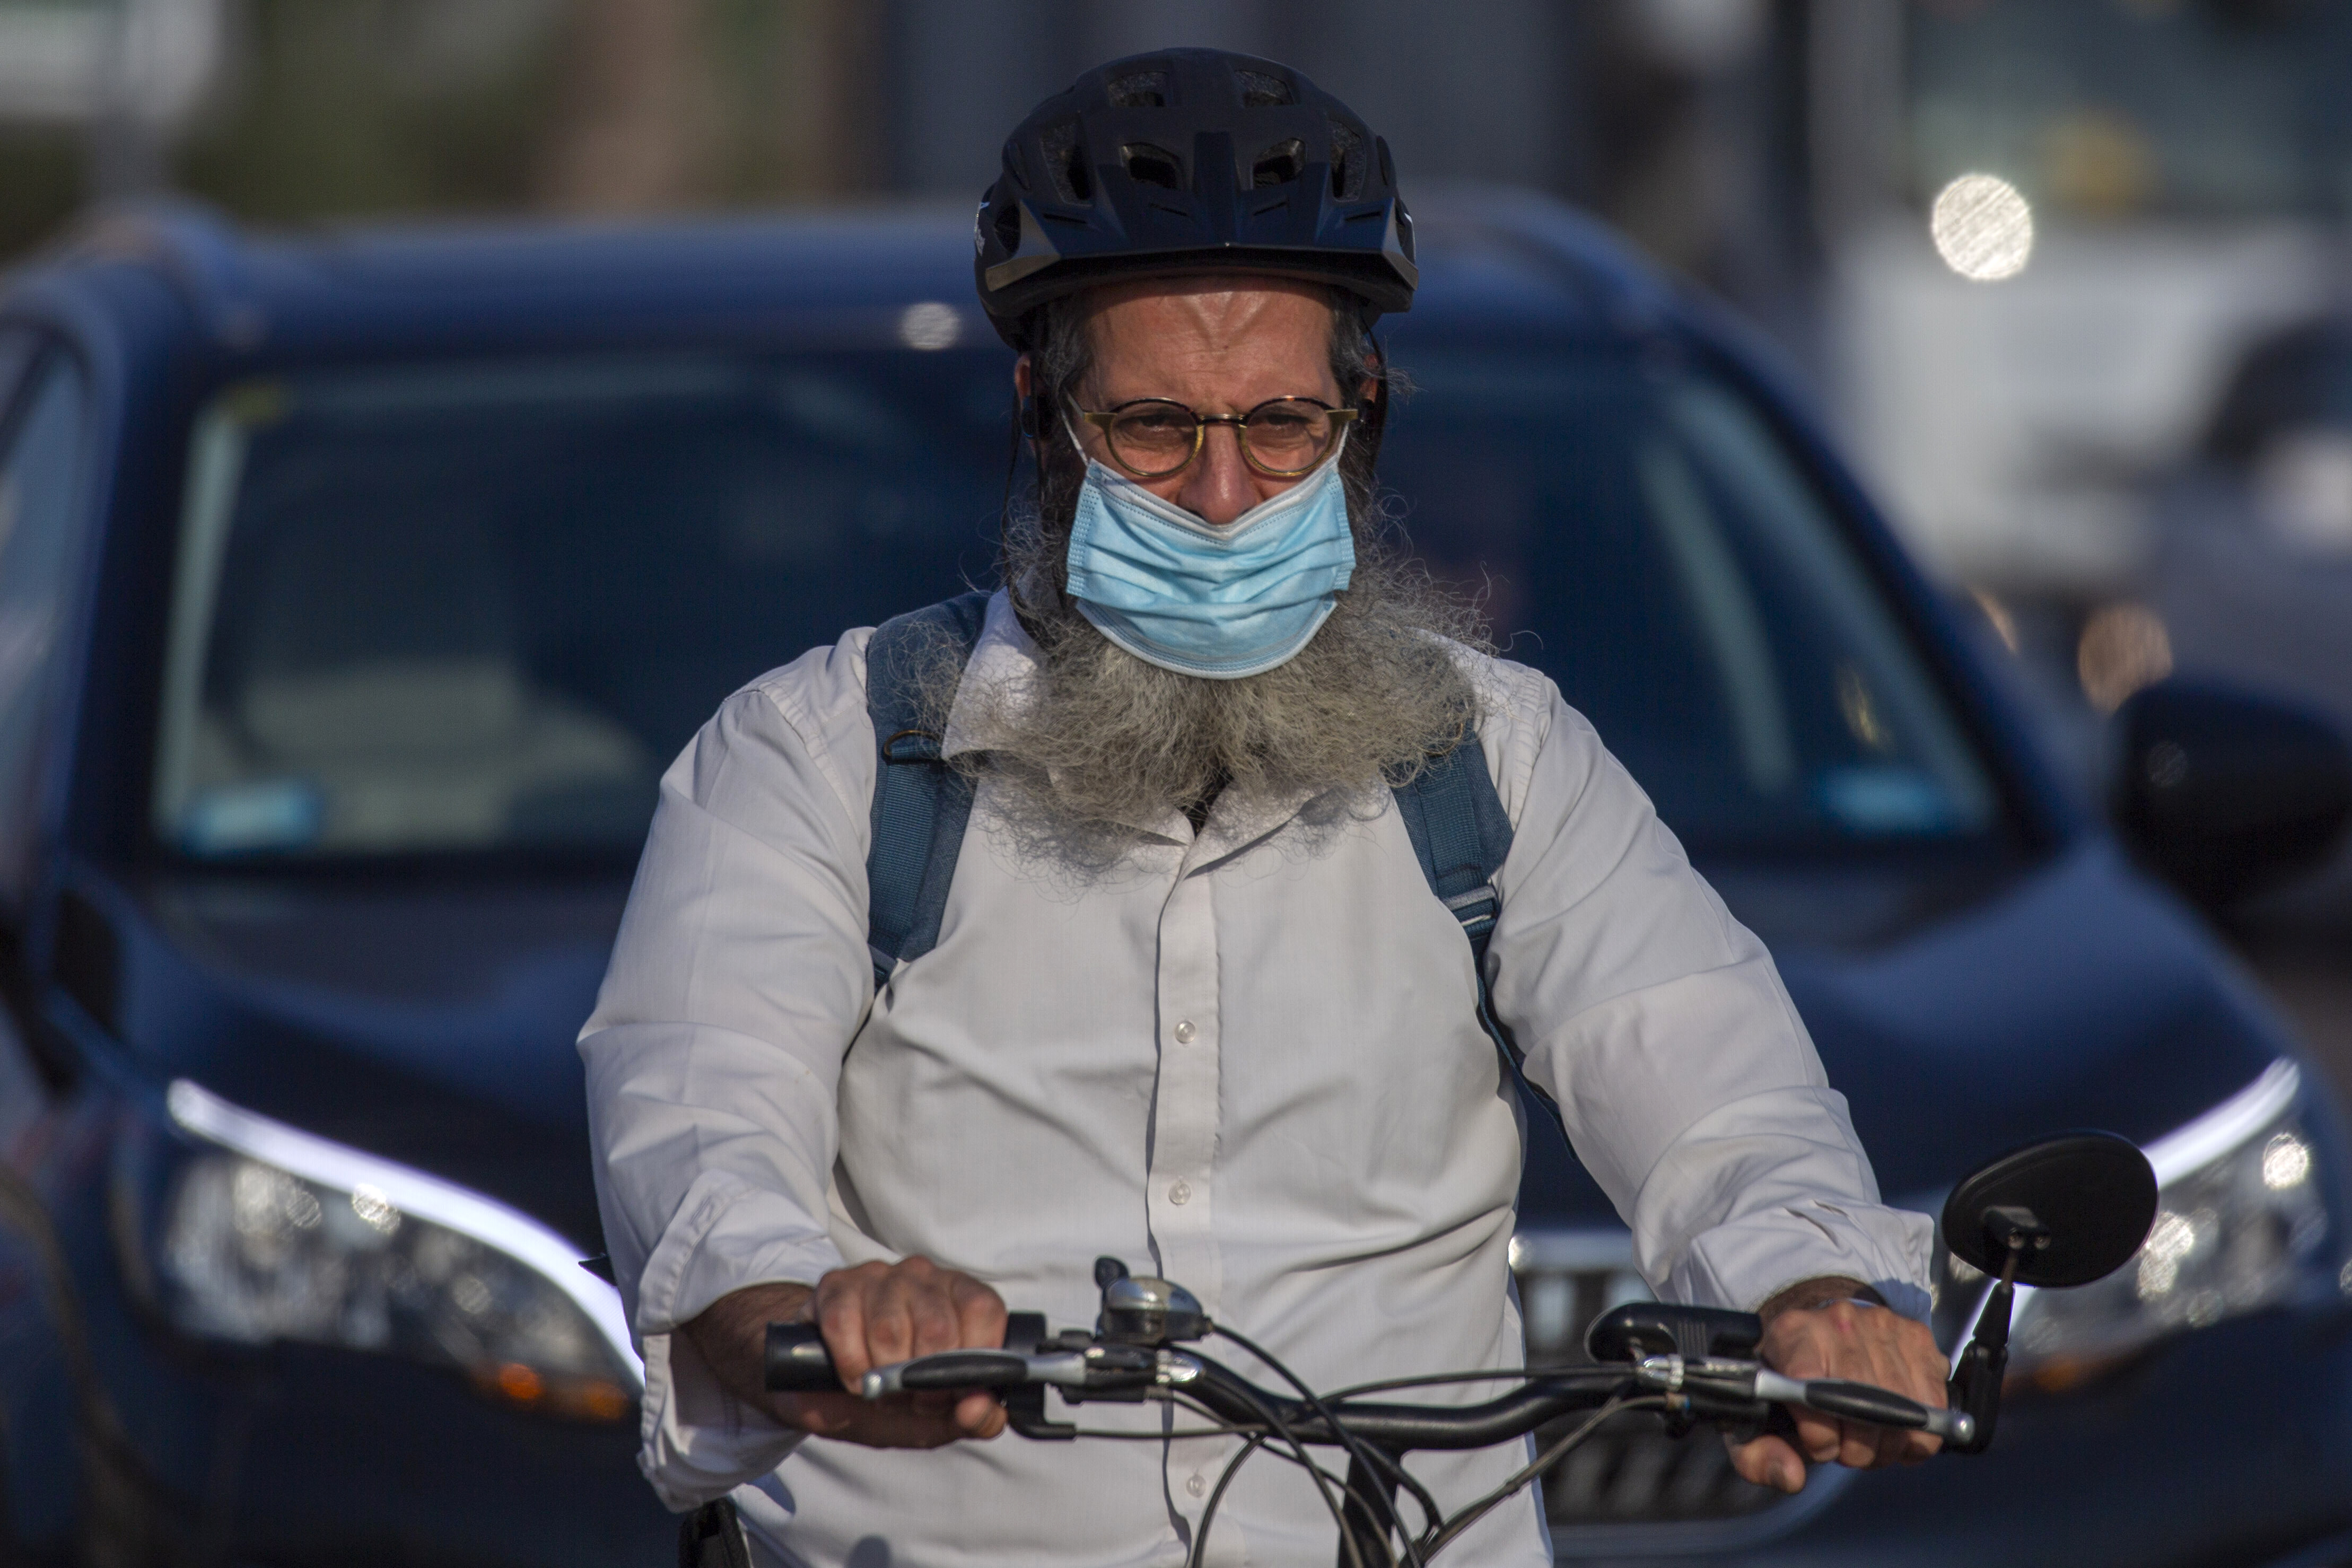 A man wears a face mask against the coronavirus pandemic in Netanya Netanya, Israel, Monday, Sept. 14, 2020. Israel will reinstate a strict new countrywide lockdown this week amid a stubborn surge in coronavirus cases. (AP Photo/Ariel Schalit)